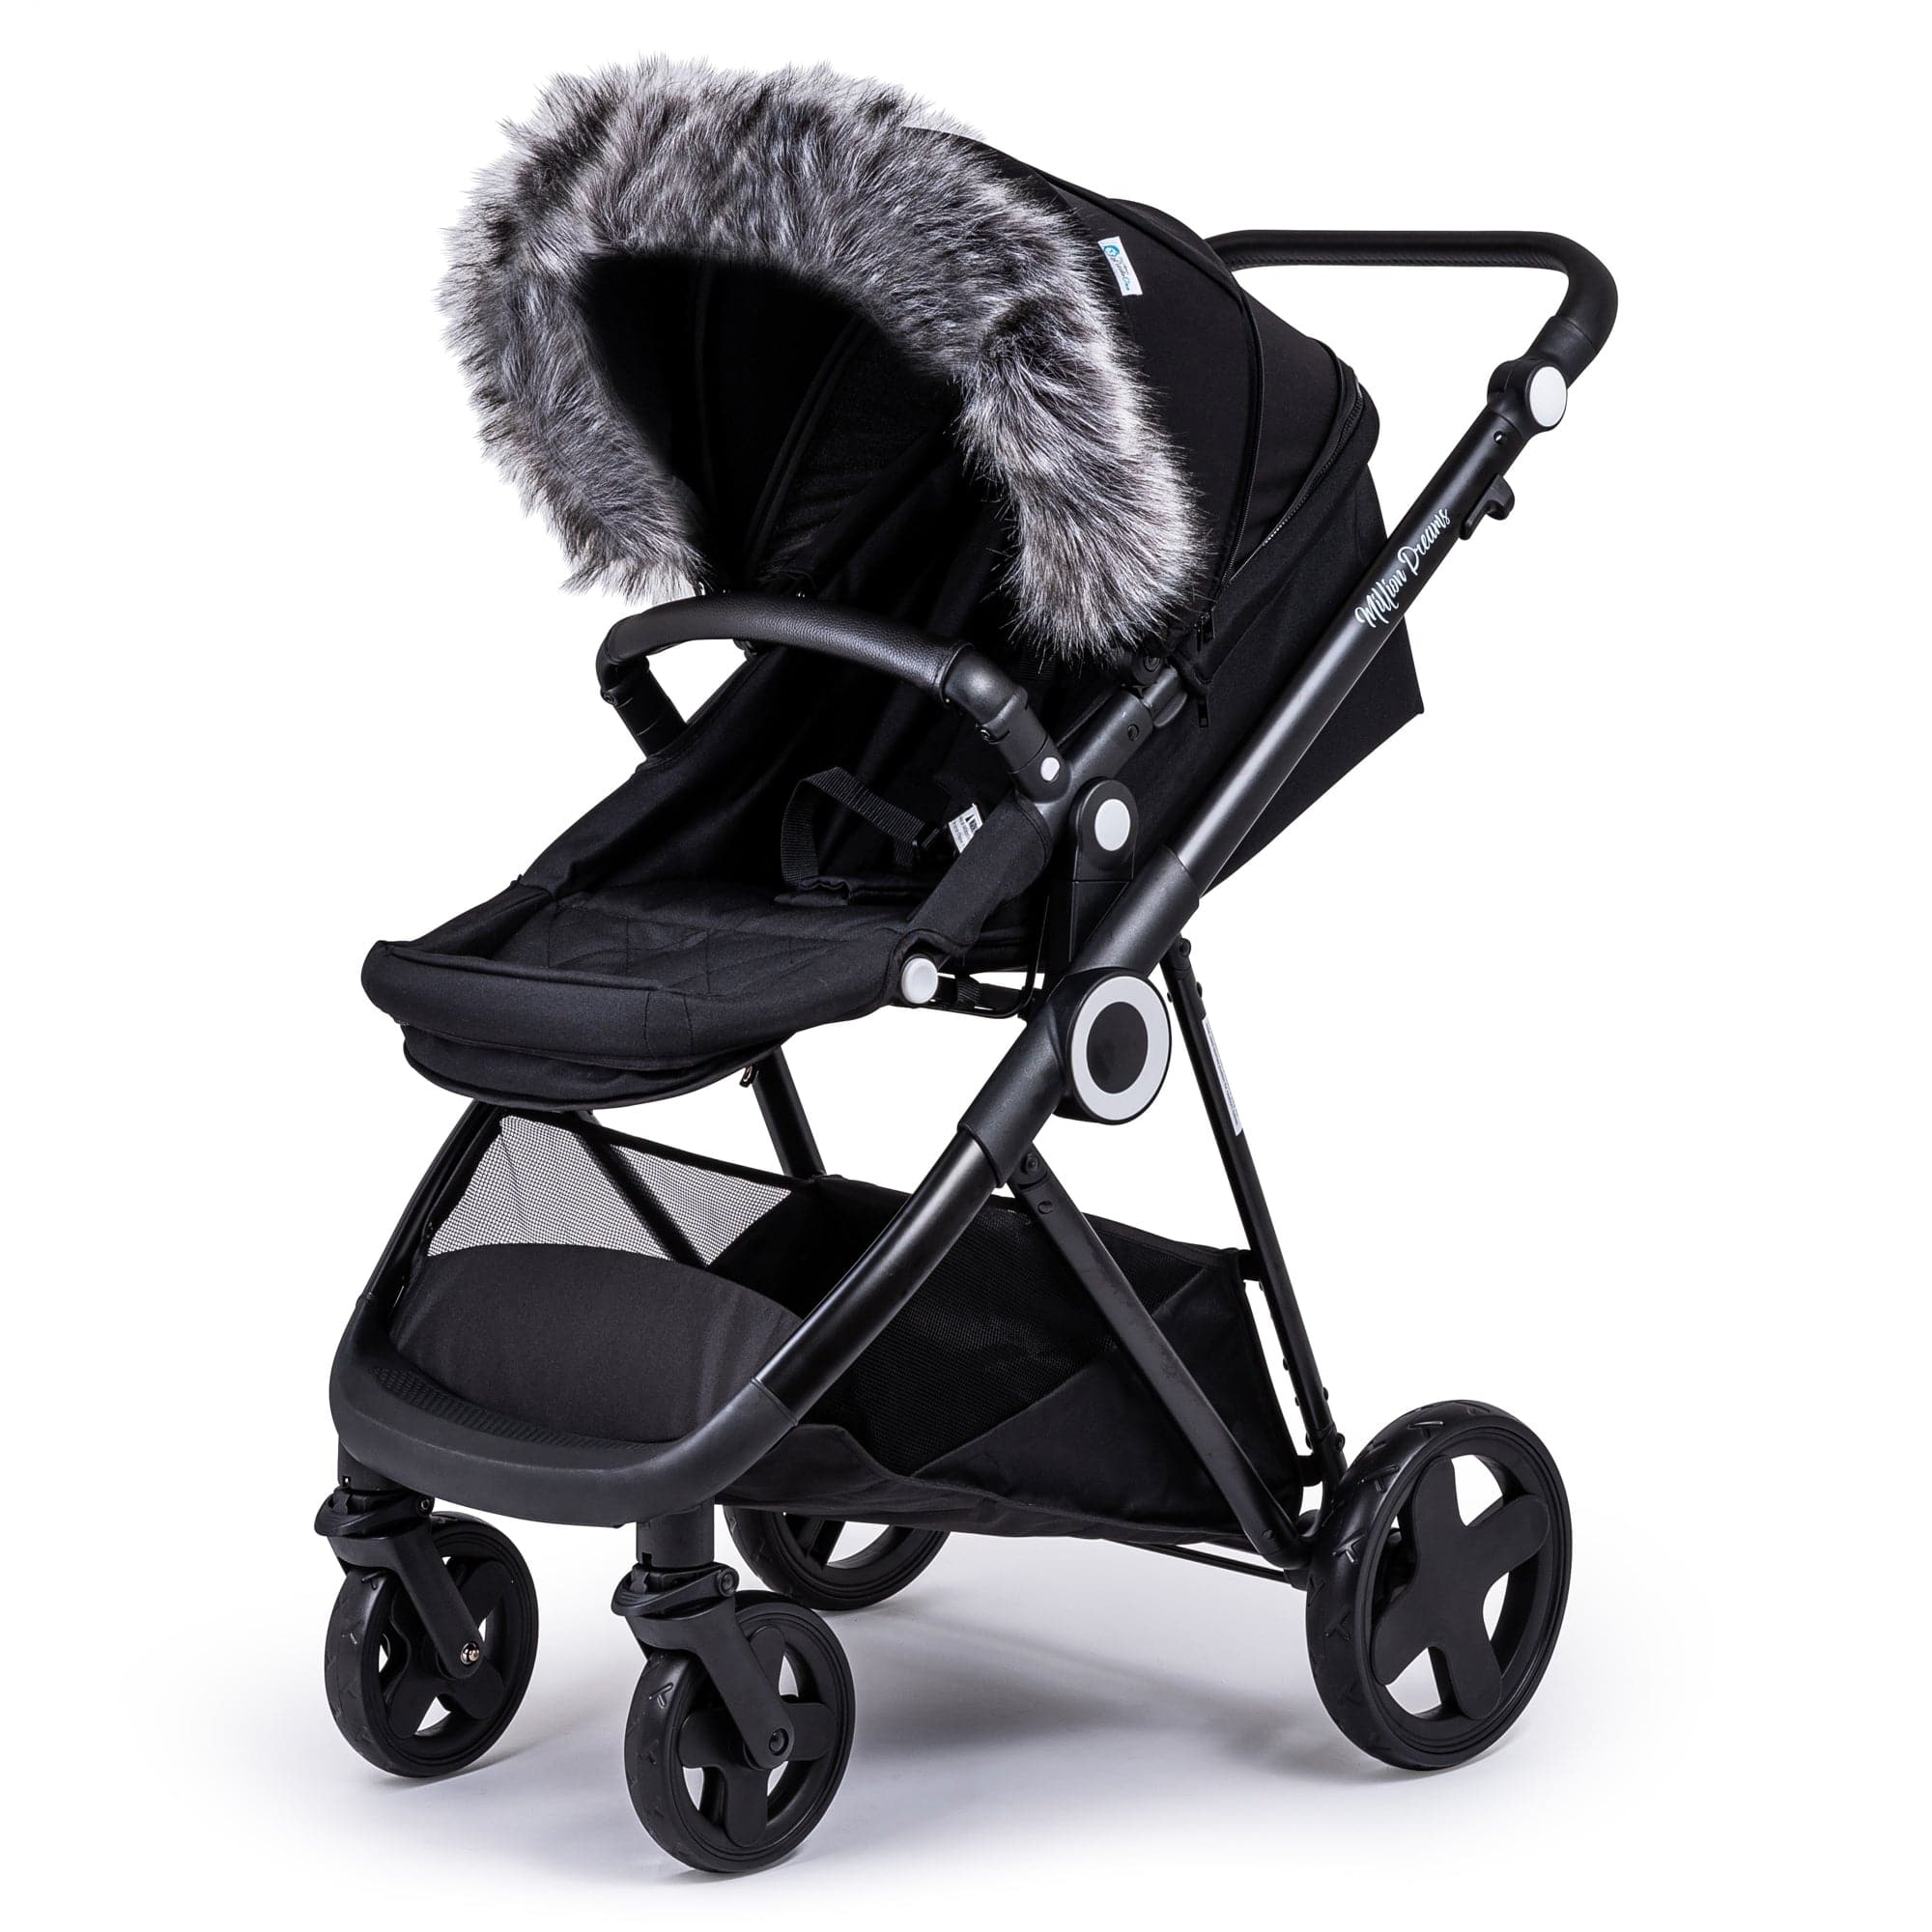 Pram Fur Hood Trim Attachment For Pushchair Compatible with Baby Elegance - Dark Grey / Fits All Models | For Your Little One